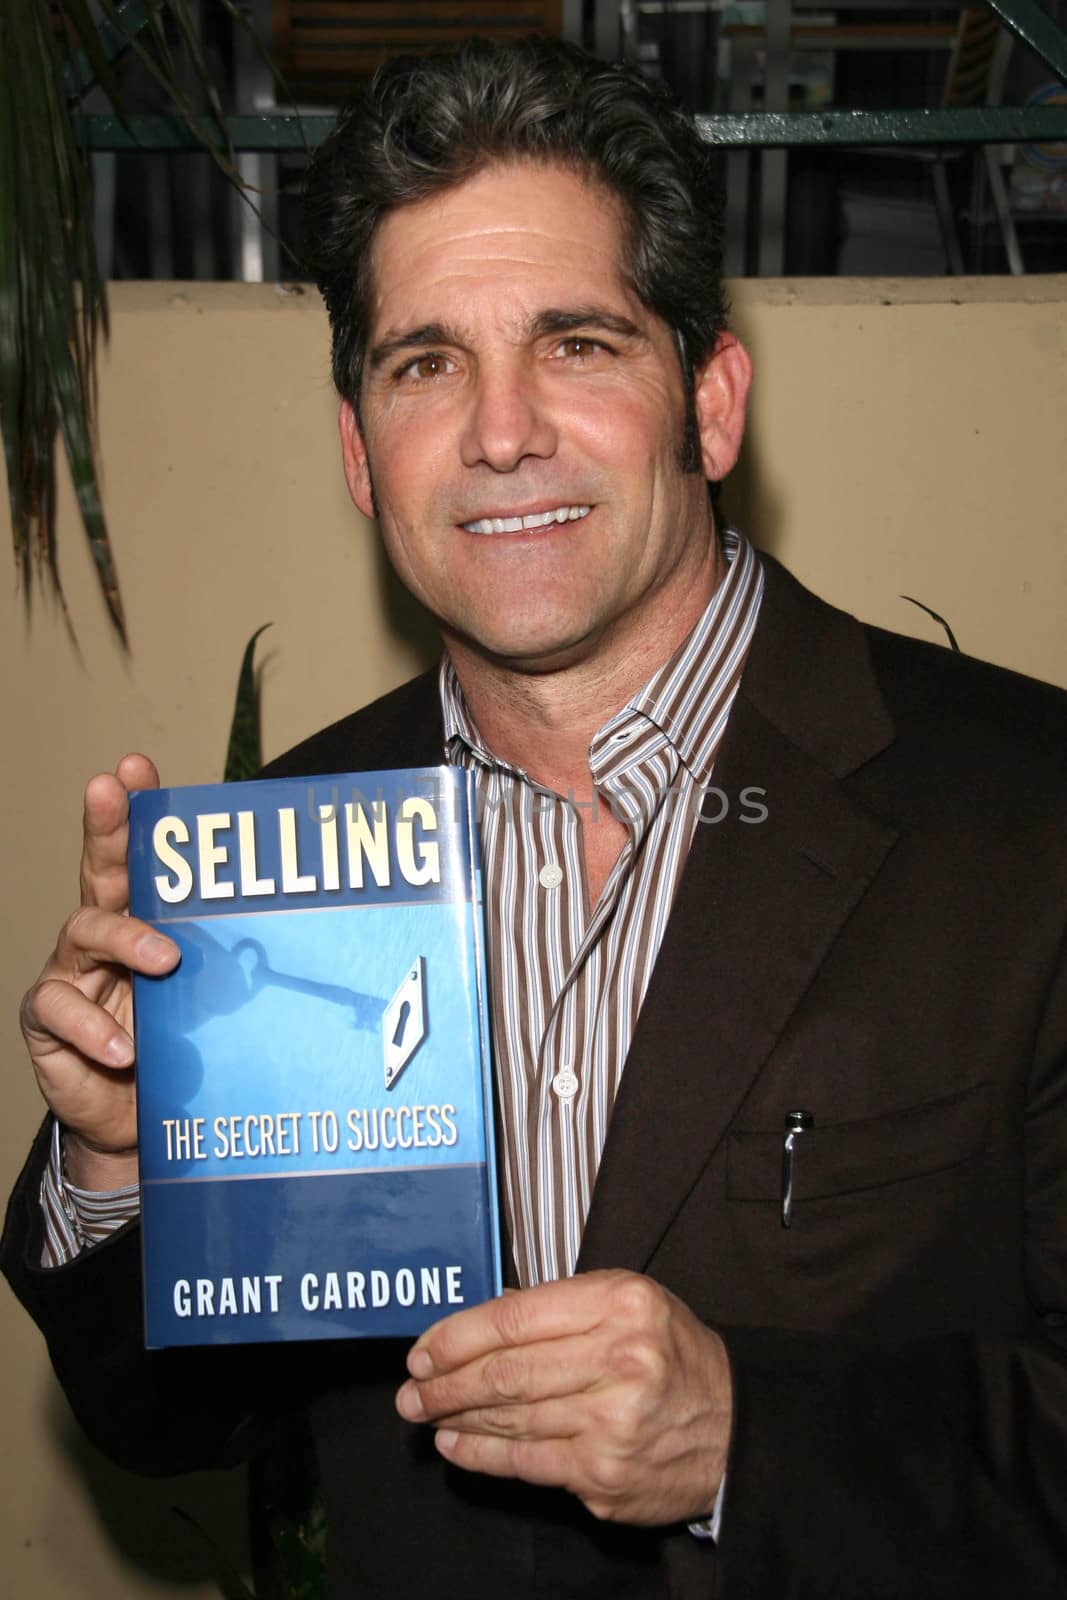 Grant Cardone
/ImageCollect by ImageCollect